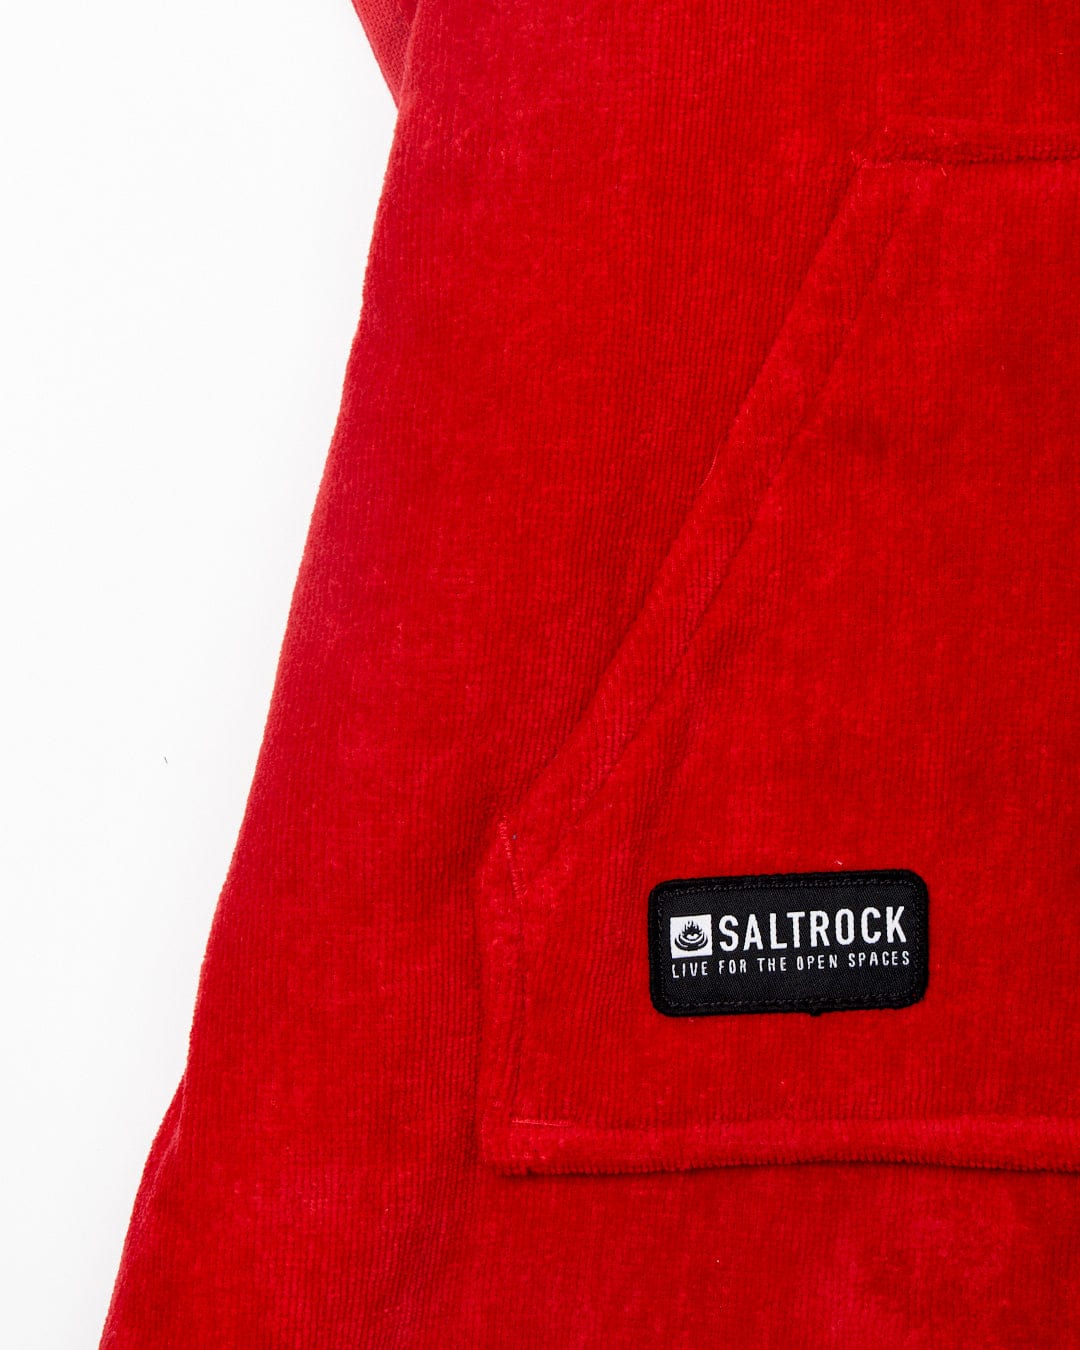 Close-up of a red Saltrock Corp - Kids Changing Robe with the brand label visible on the front pocket area.